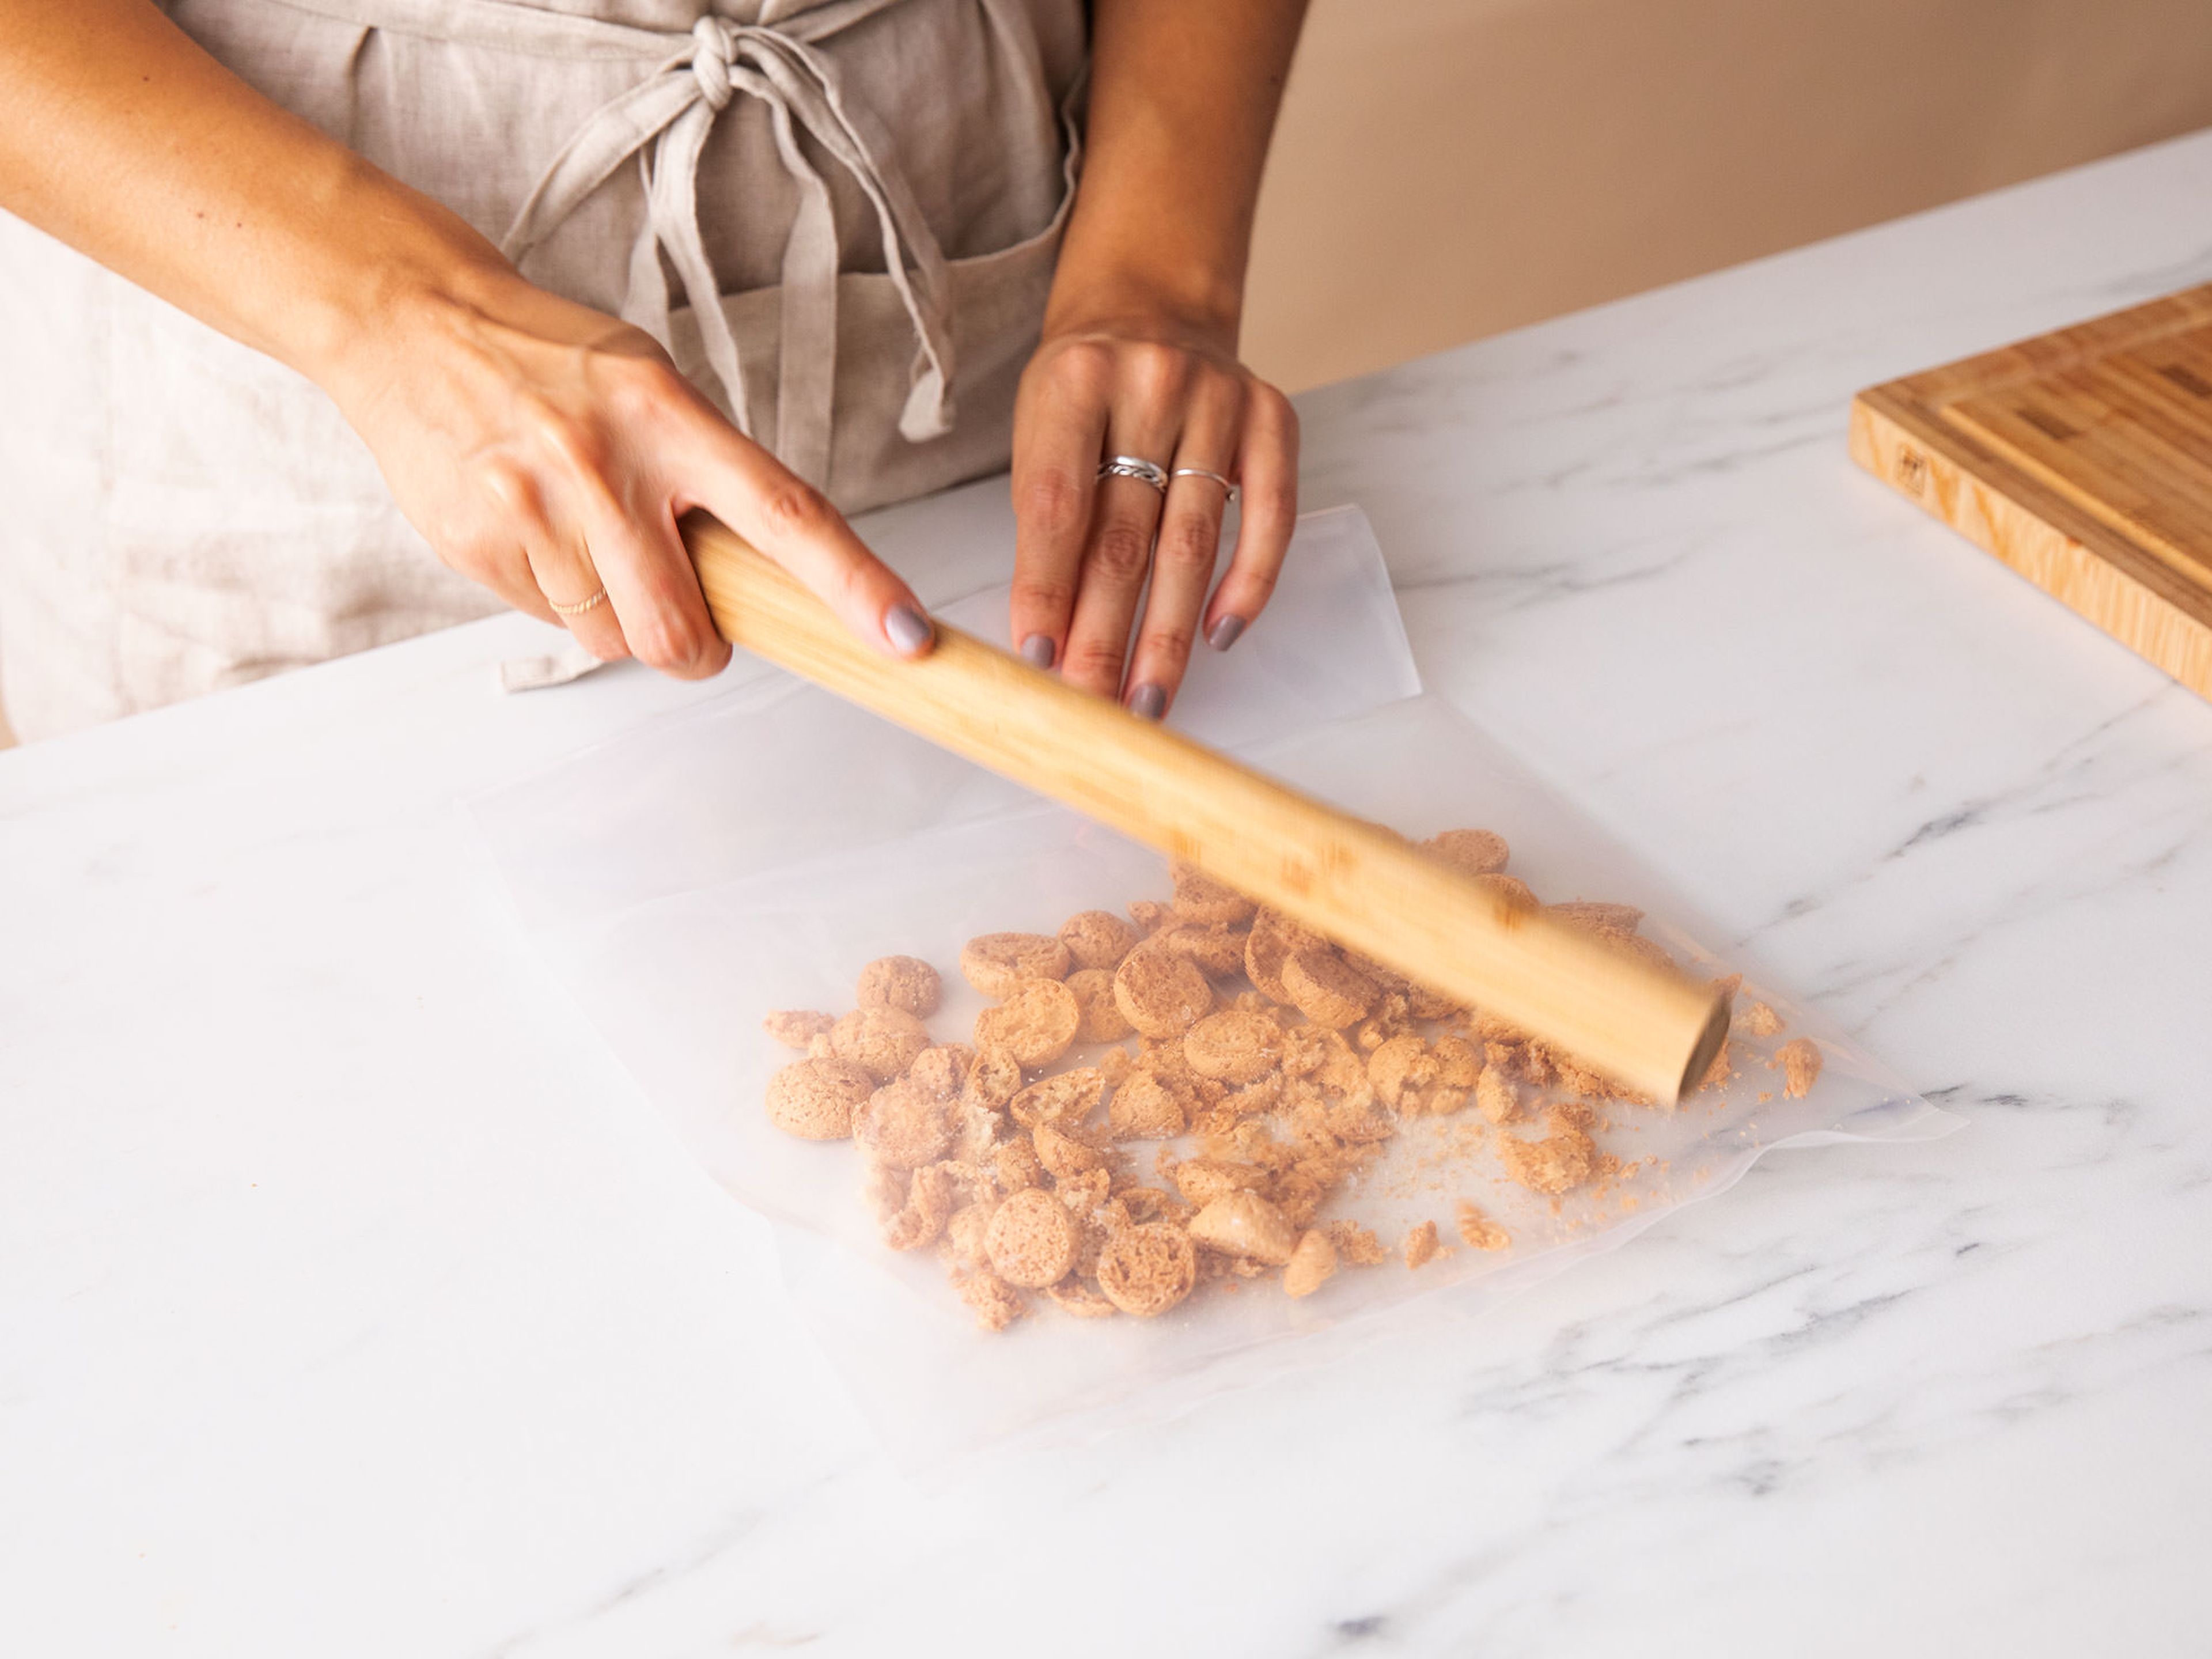 Beat the mascarpone in a bowl with a hand mixer until fluffy. Put amaretti cookies in a resealable freezer bag and bash to pieces with a rolling pin. The cookies pieces should still be chunky, with very little fine powder.